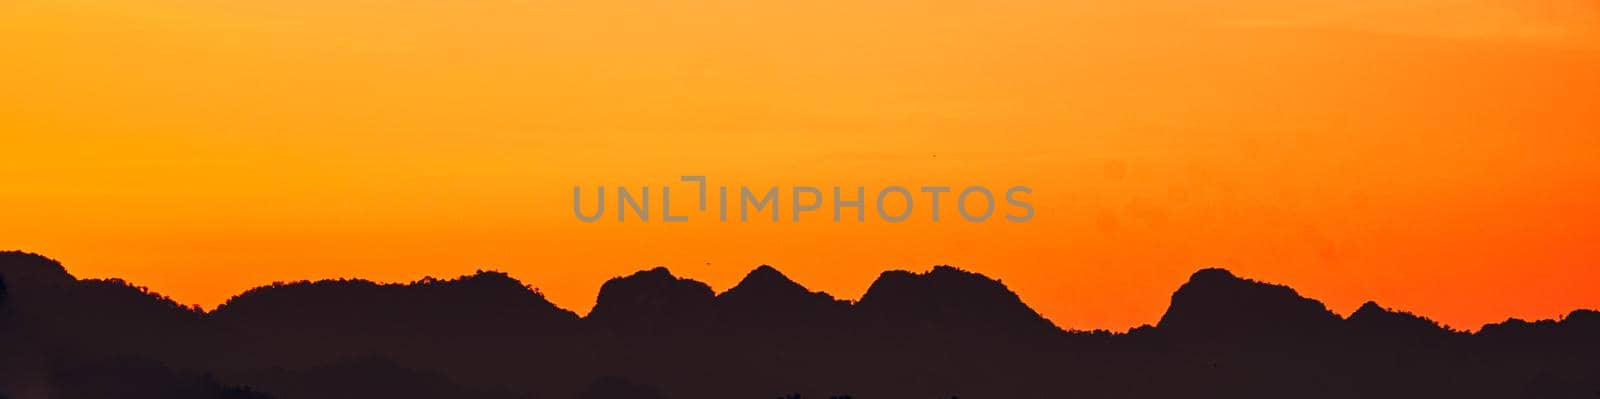 Dramatic  sunset landscape with orange sky, silhouettes of mountains nature background.